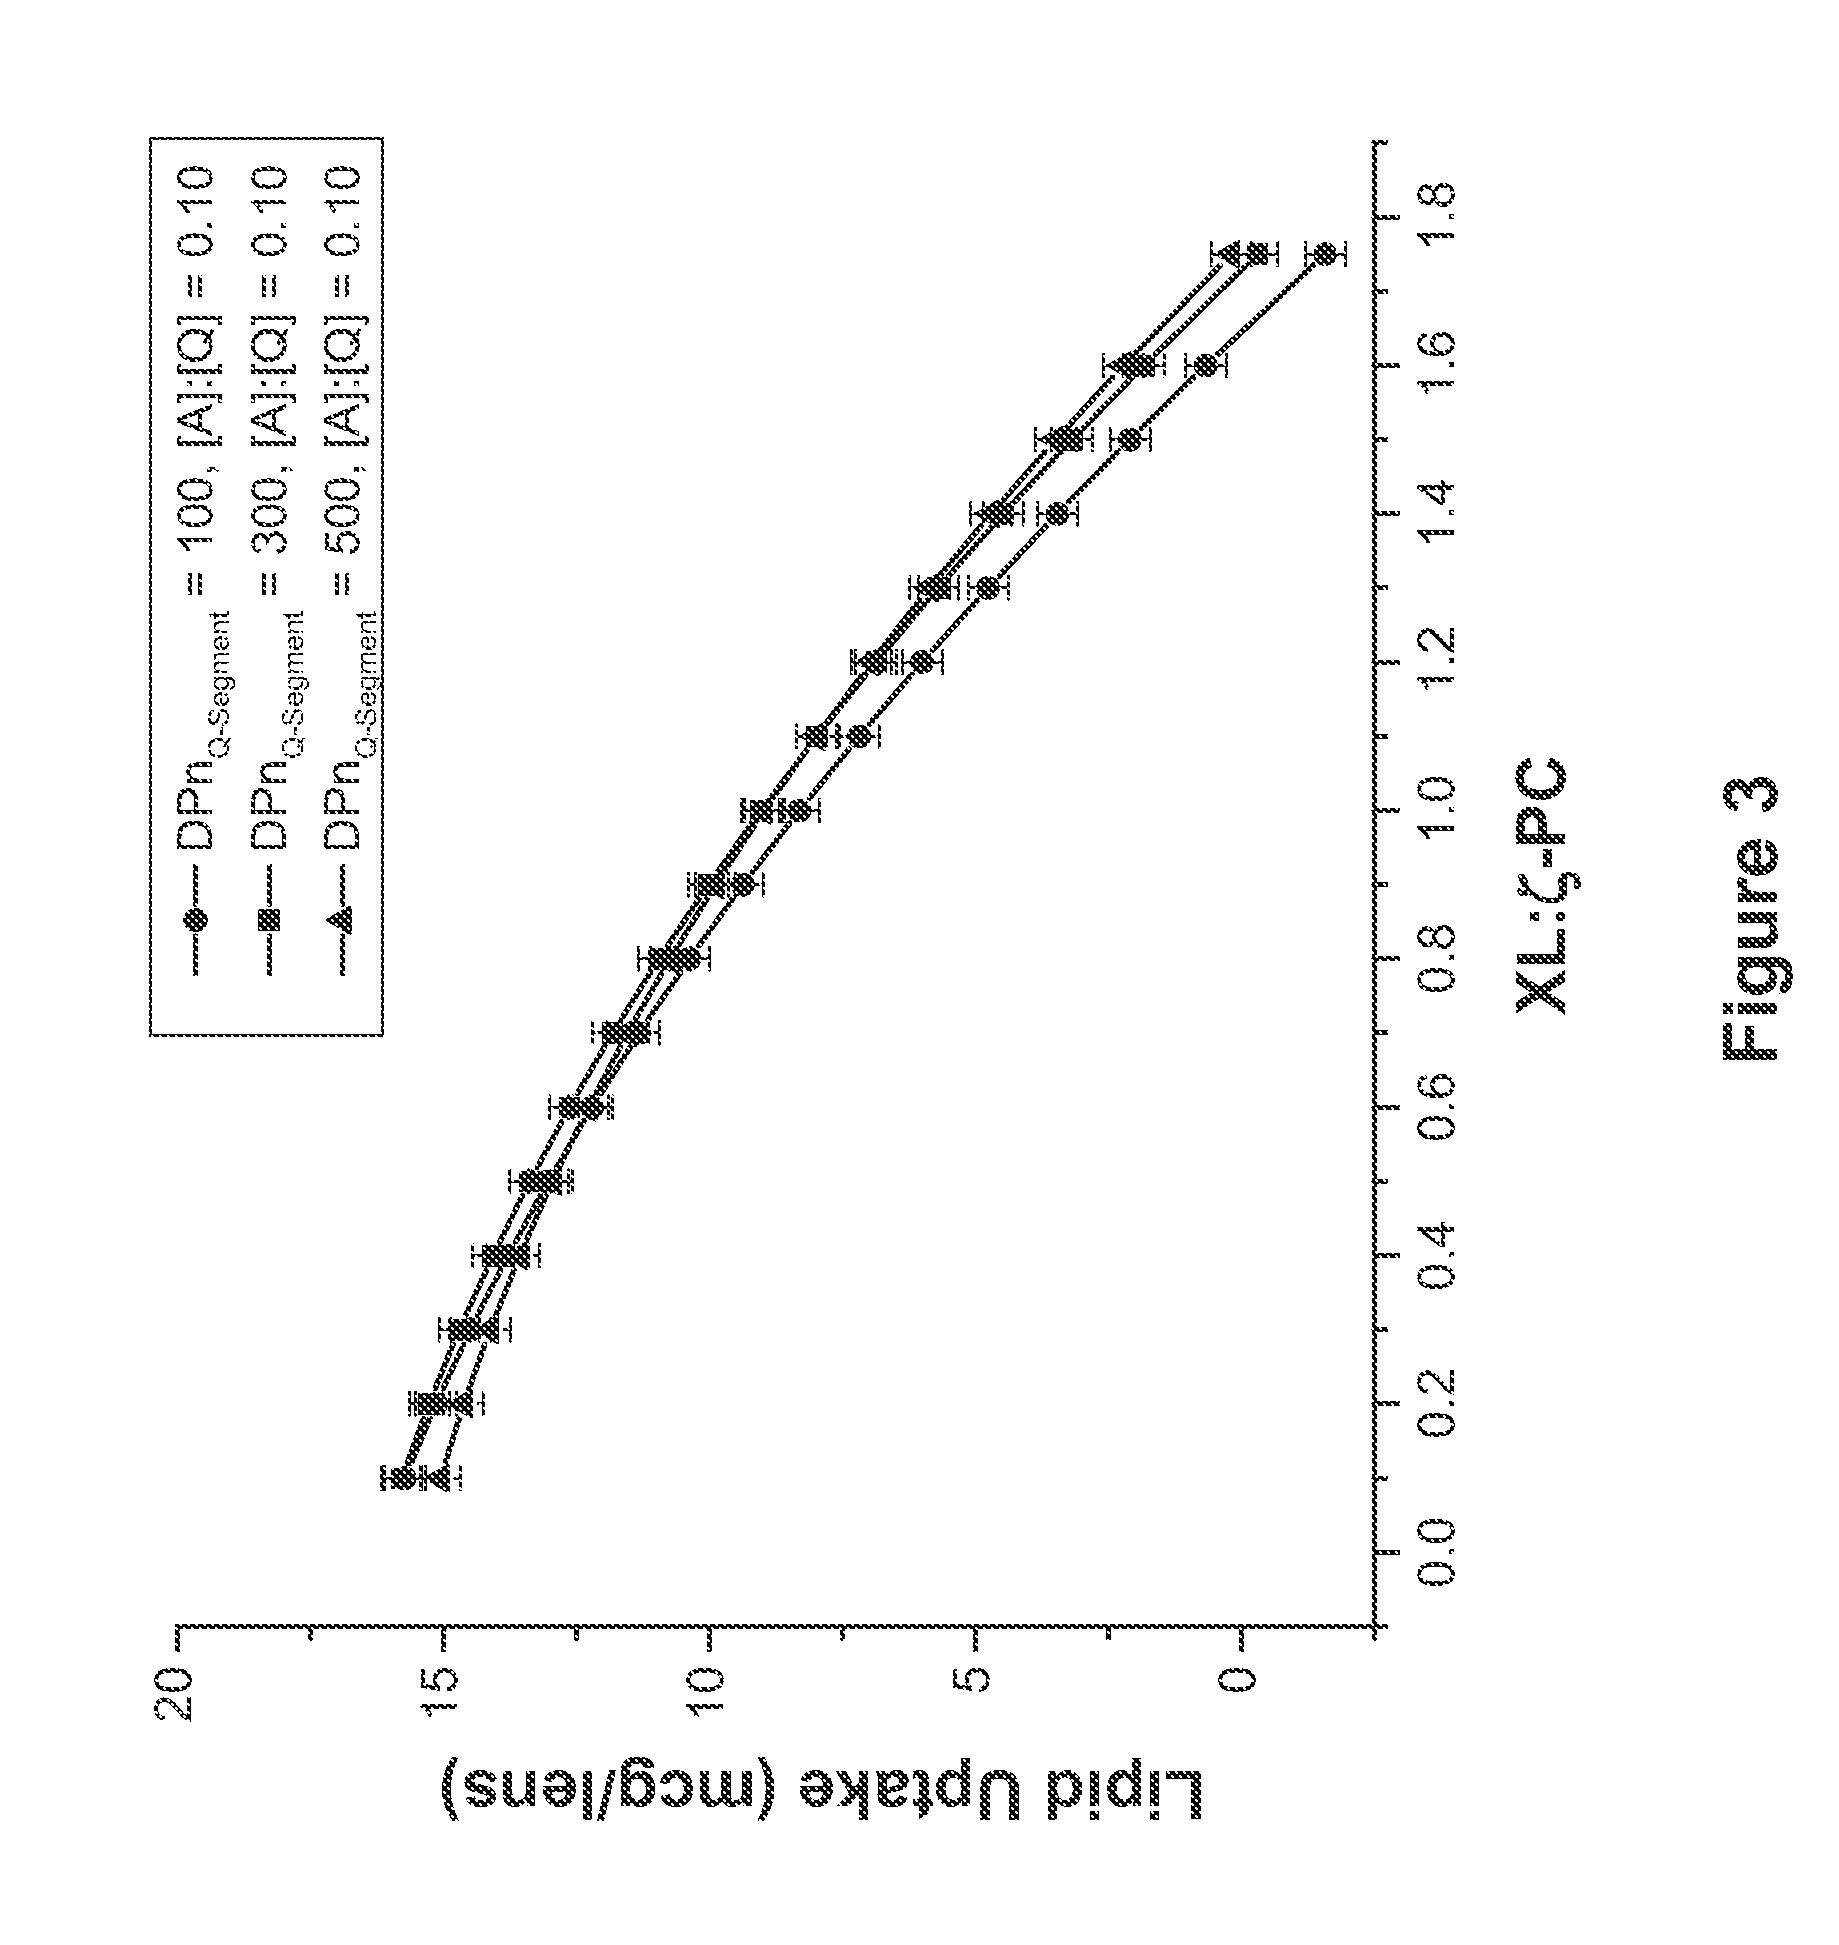 Polymers and nanogel materials and methods for making and using the same